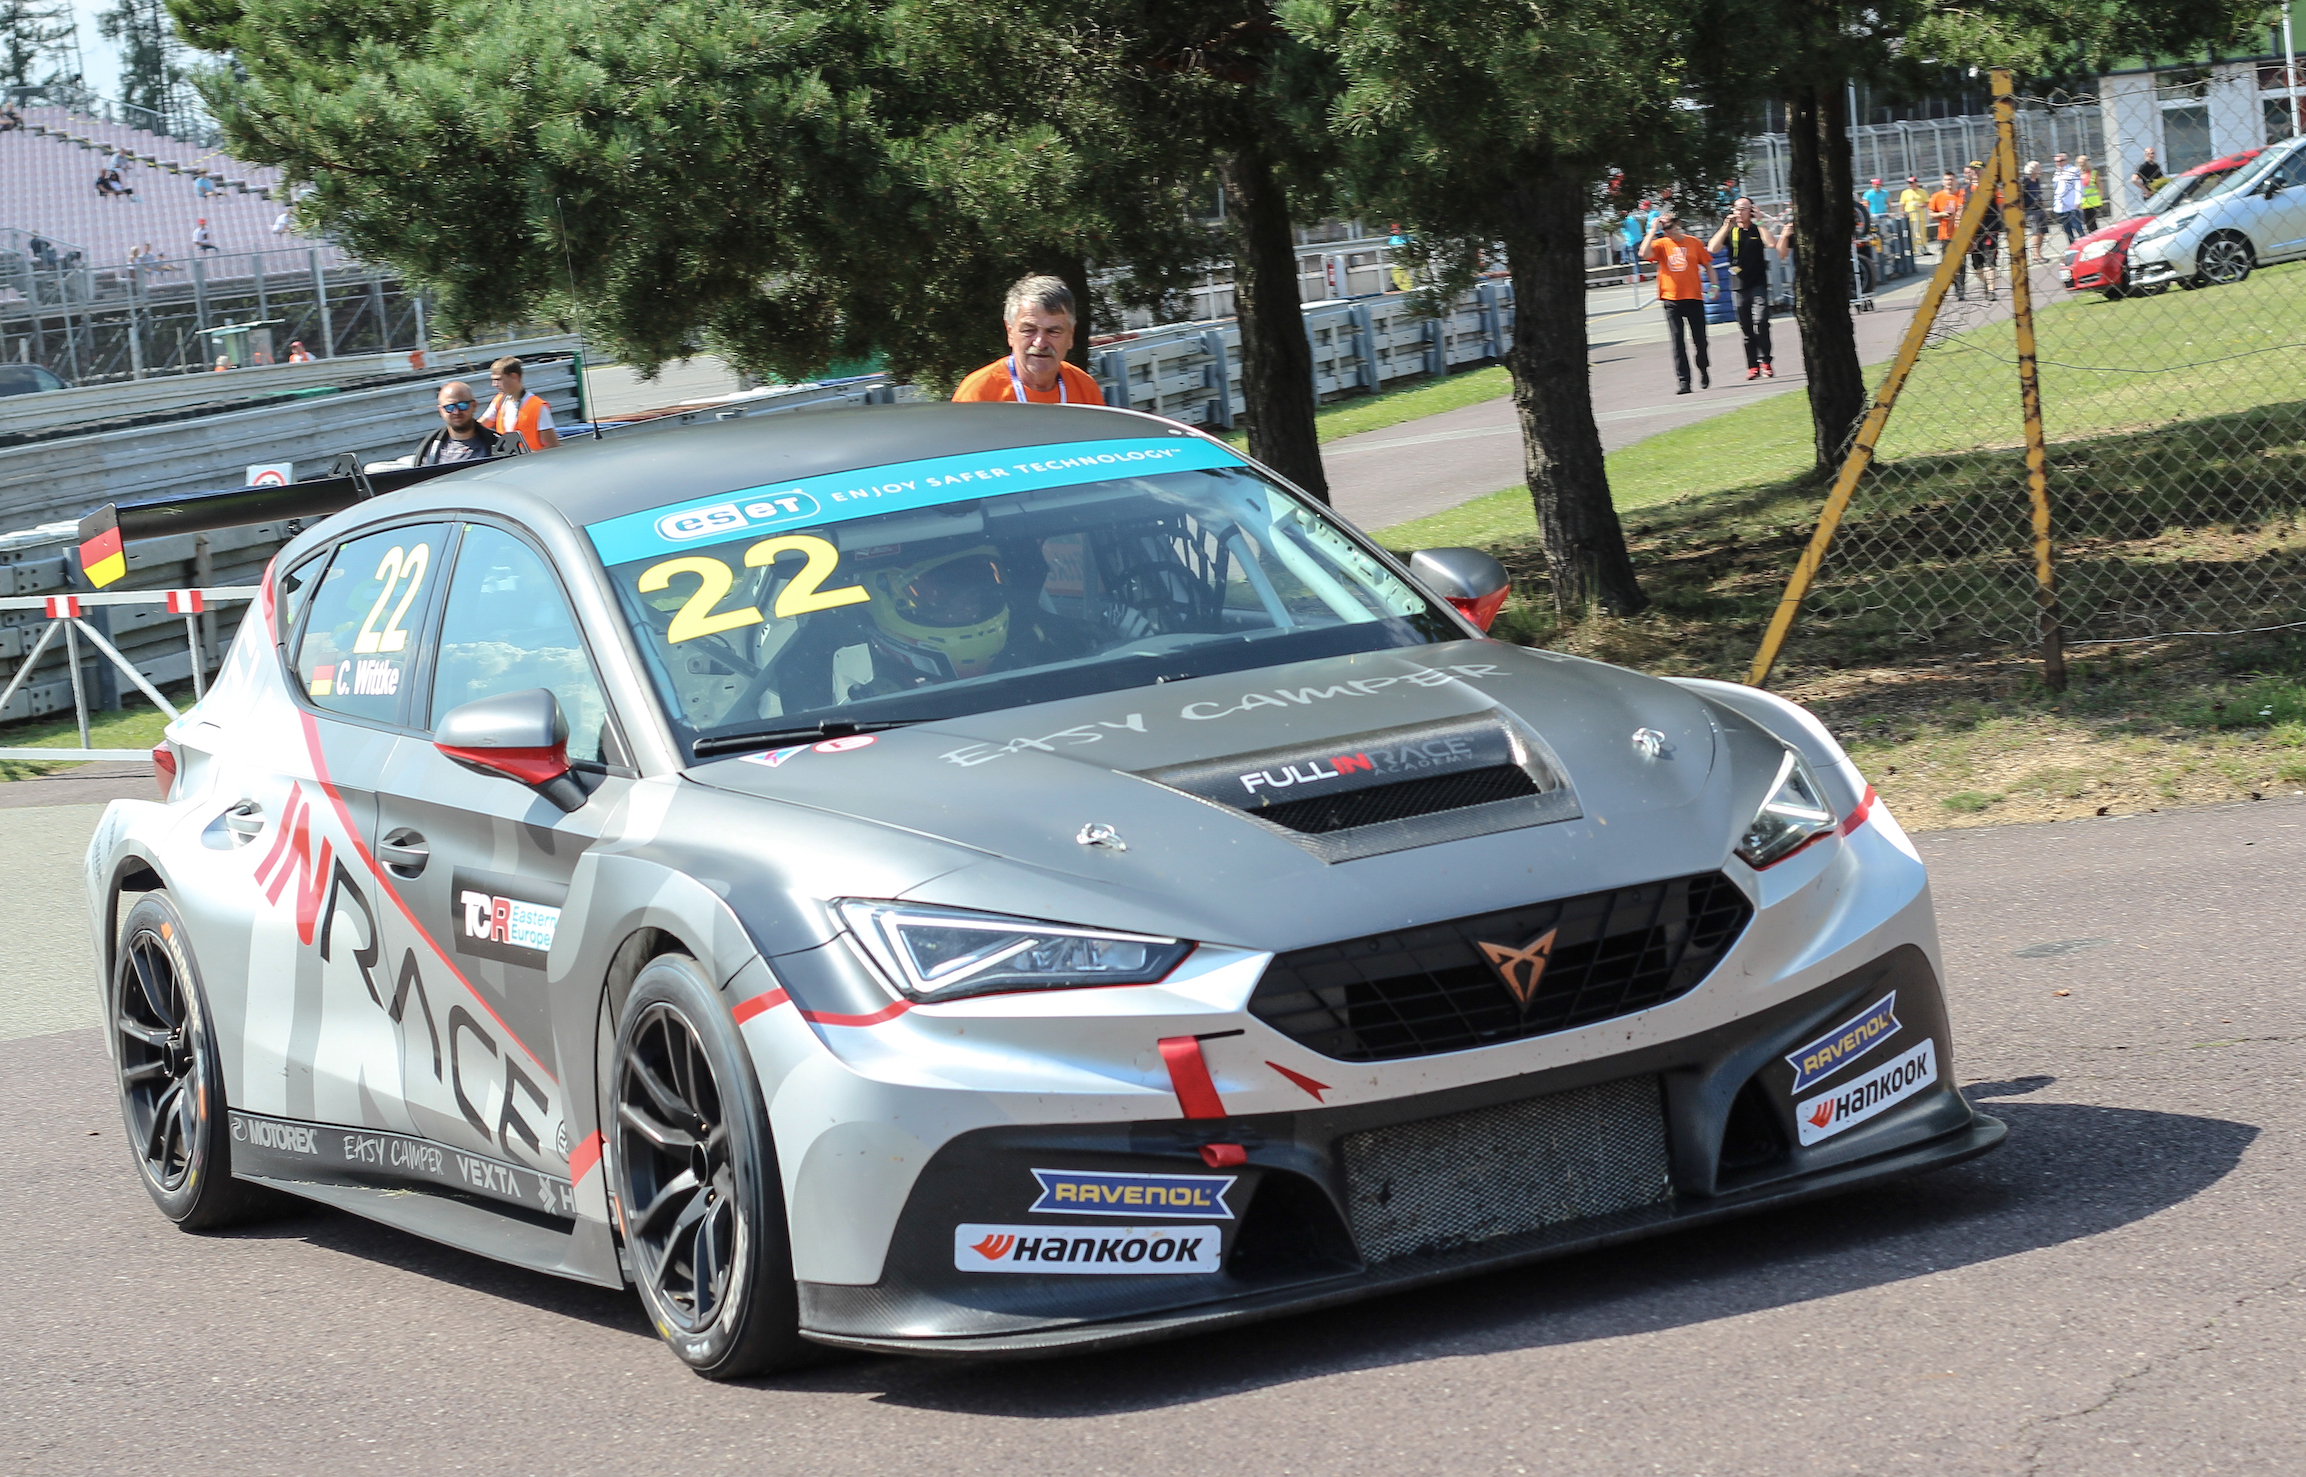 Wittke gained maiden TCR Eastern Europe victory after dominant performance, Makeš is closer to the title